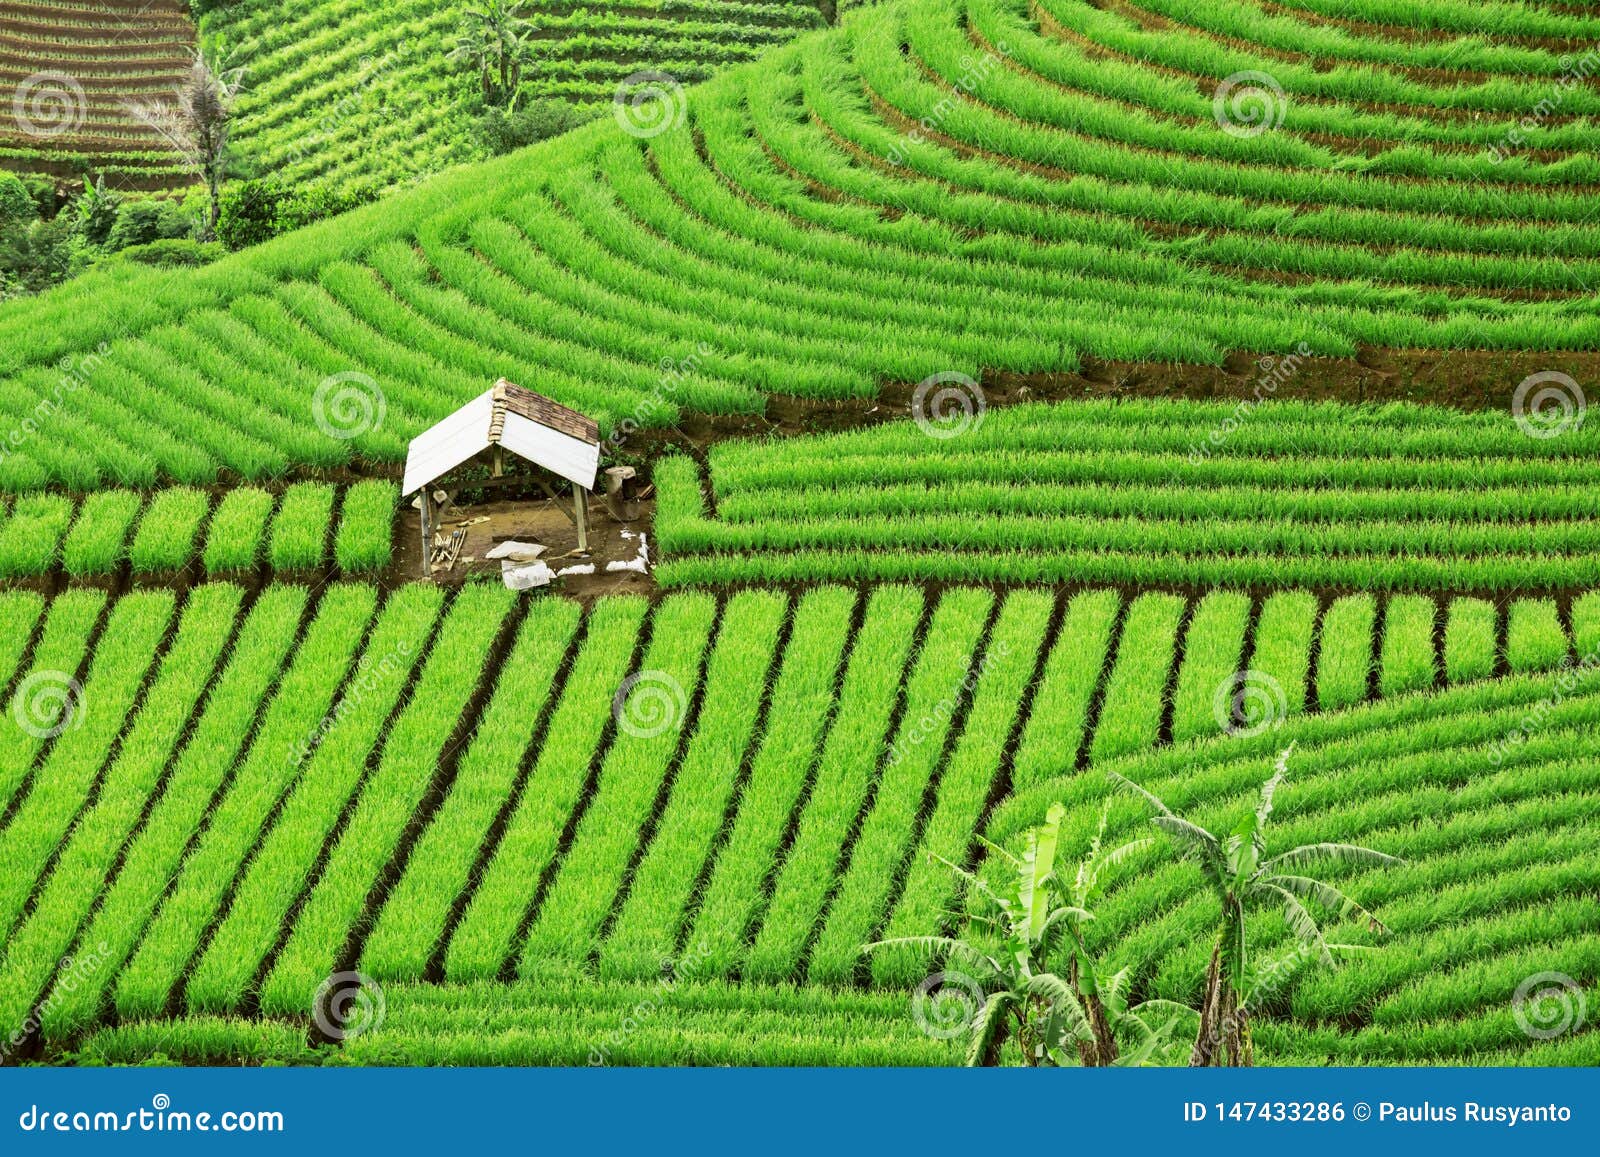 beautiful green terraced fields with a hovel